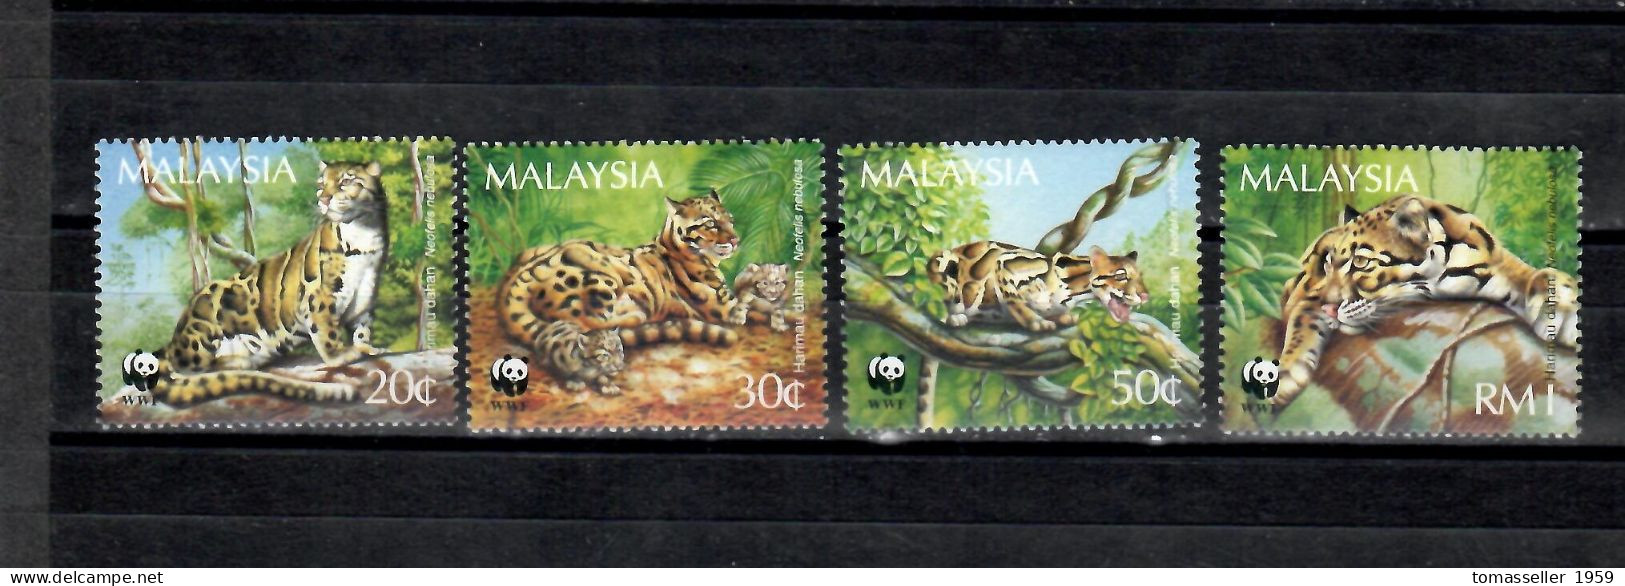 Malaysia-1995 Endangered Species - Clouded Leopard-4v,MNH** - Malaysia (1964-...)